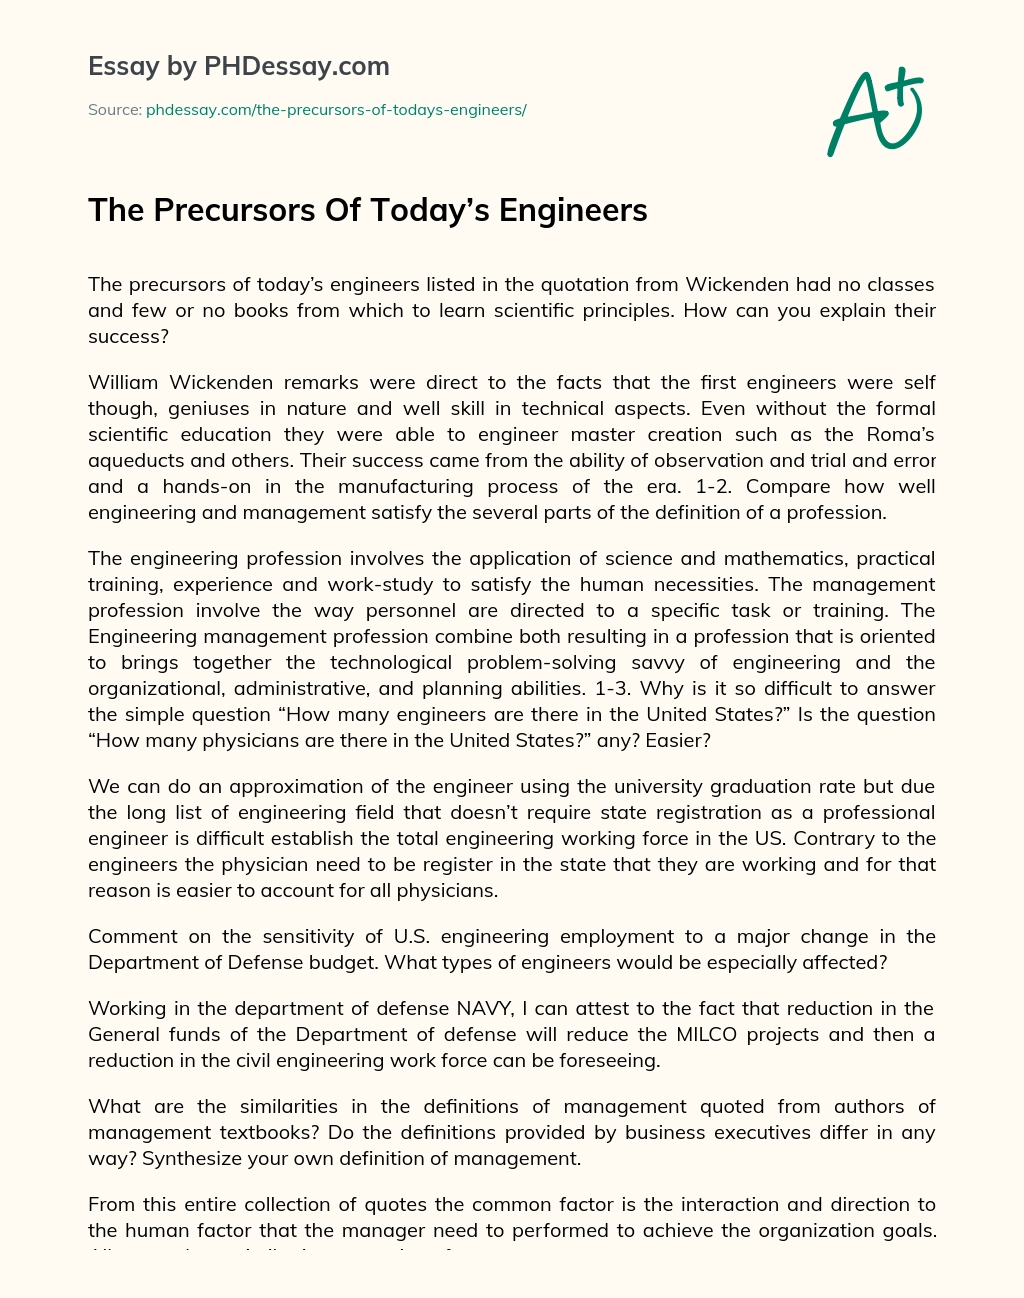 The Precursors Of Today’s Engineers essay